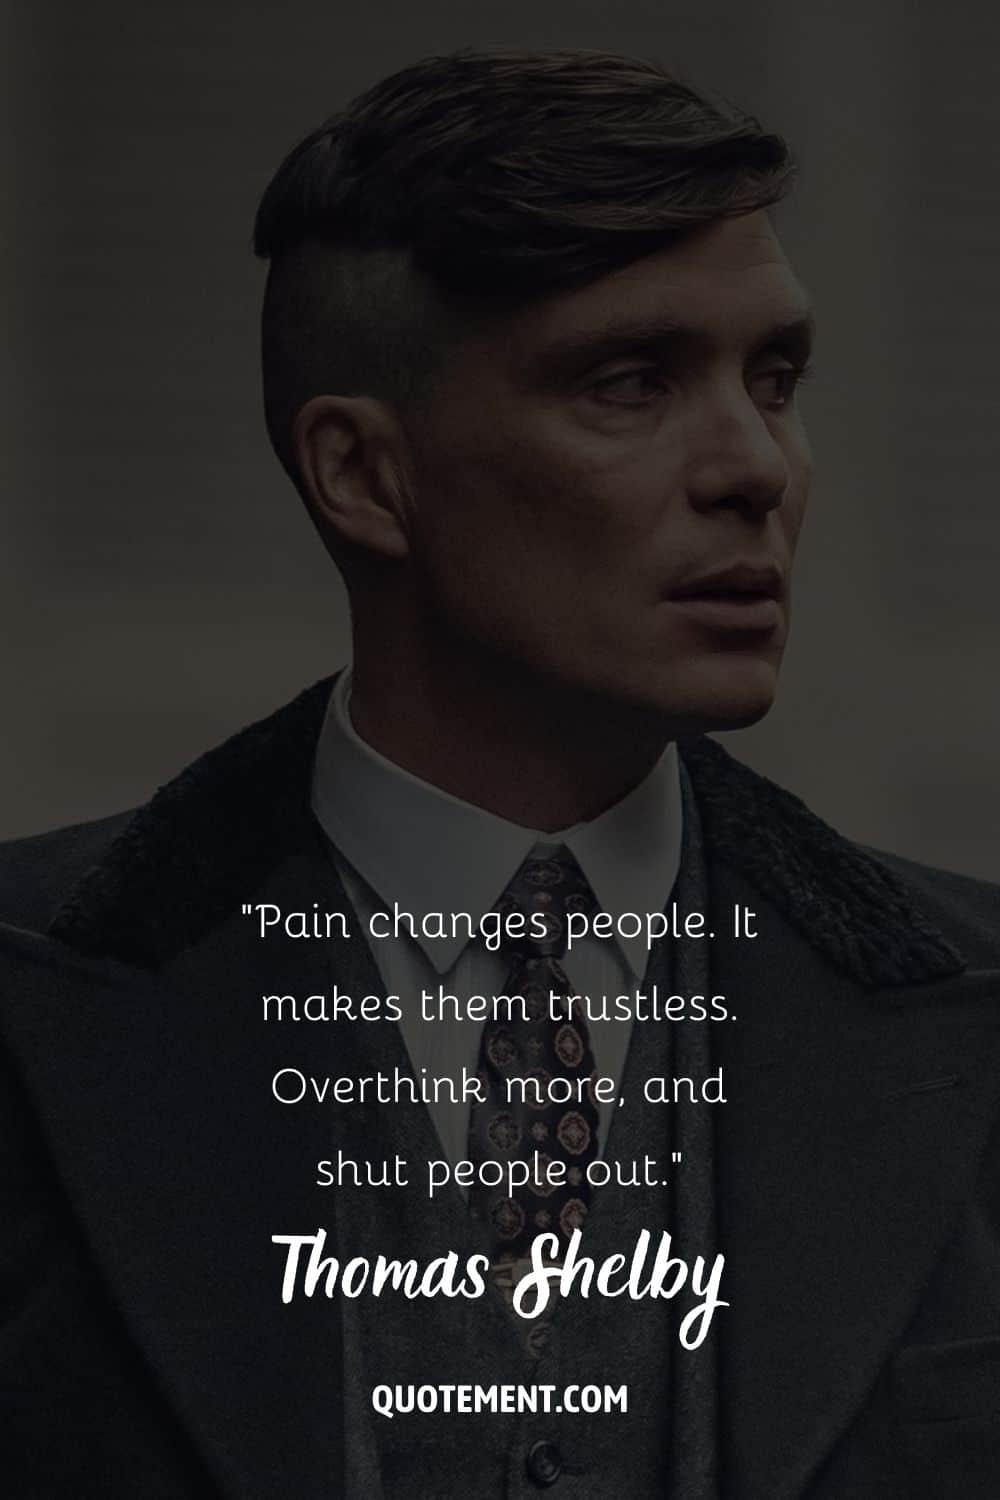 Cillian Murphy rocks the Peaky Blinder look representing Tommy Shelby quote
